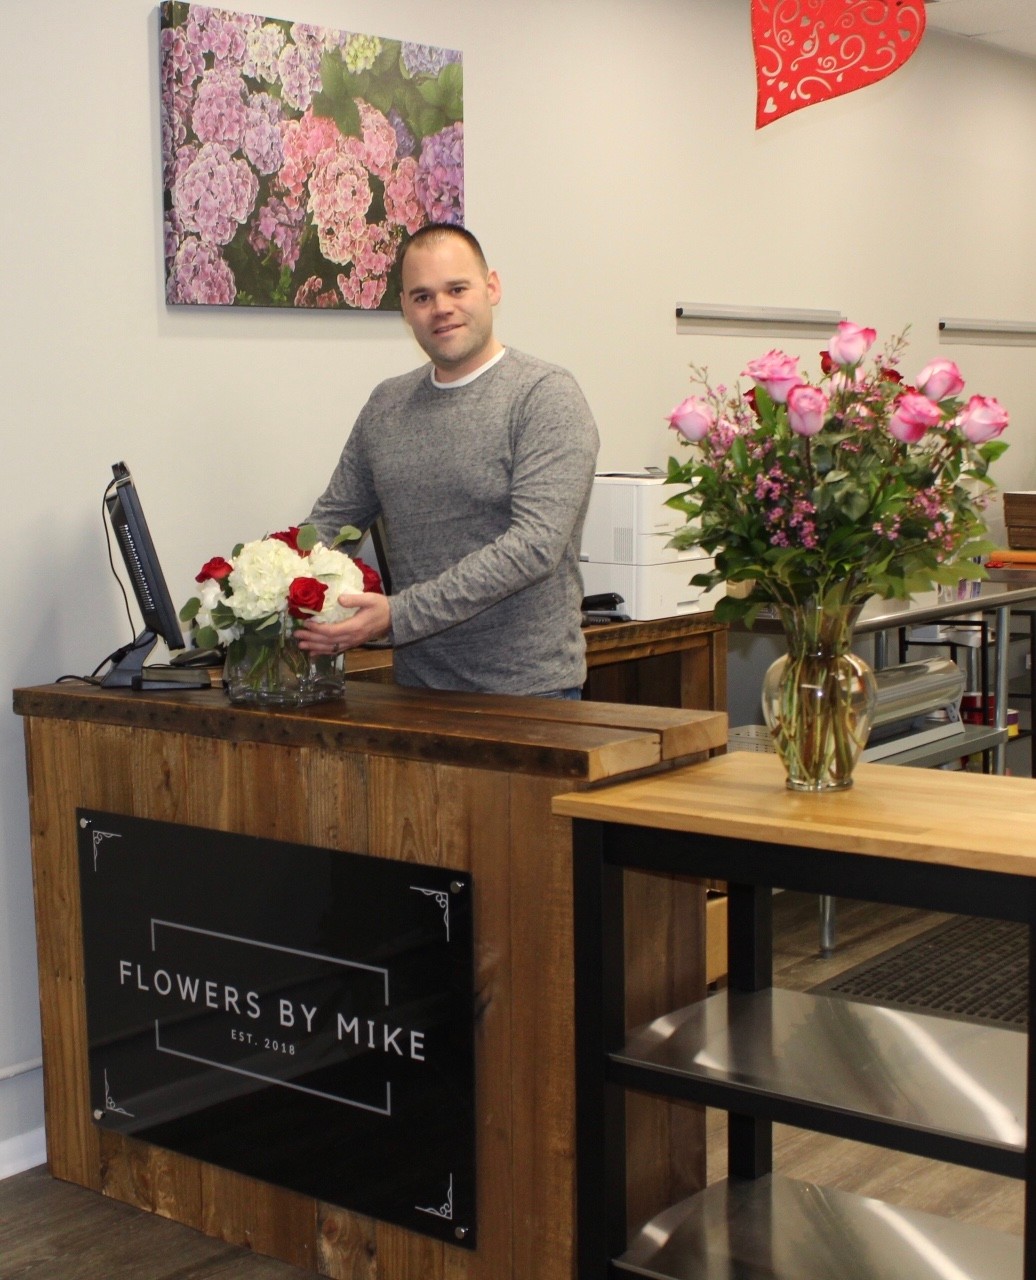 Mike Graham is readying to open his new business, Flowers by Mike, at 221 Merrick Road in his hometown of Oceanside.